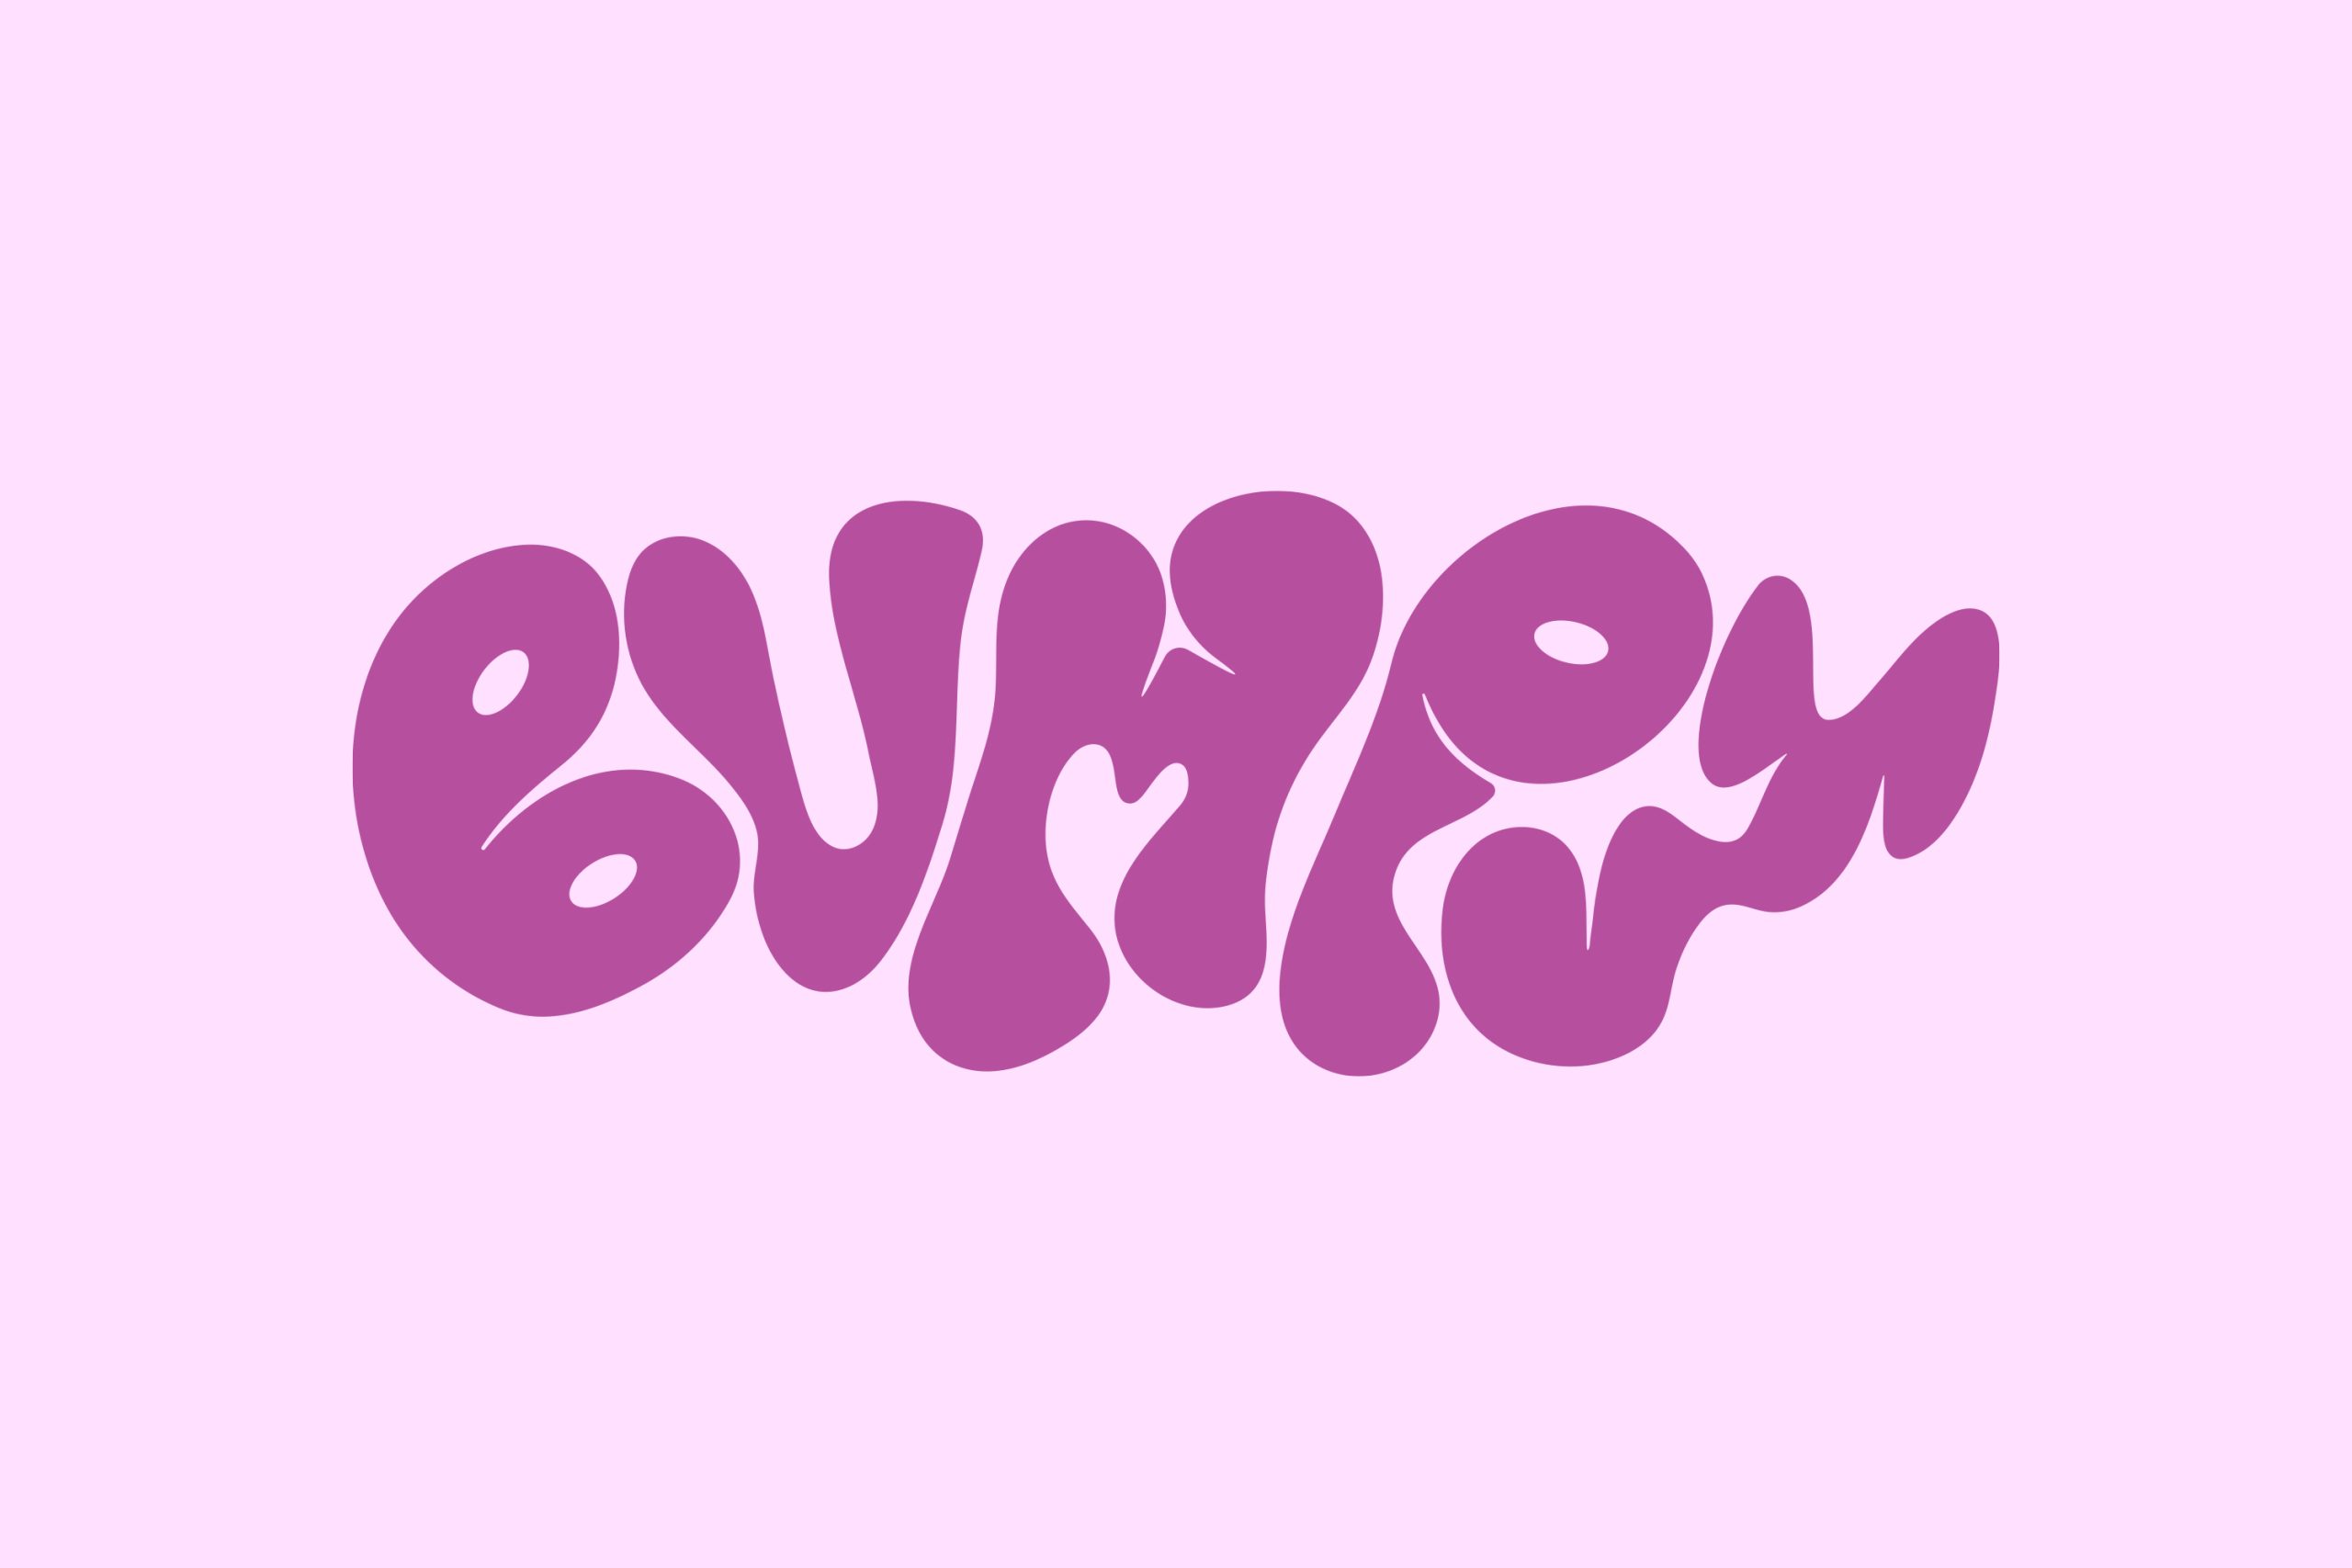 Image of custom lettering that says Bumpy. The letterforms are also very bumpy. The text is hot pink on a light pink background.